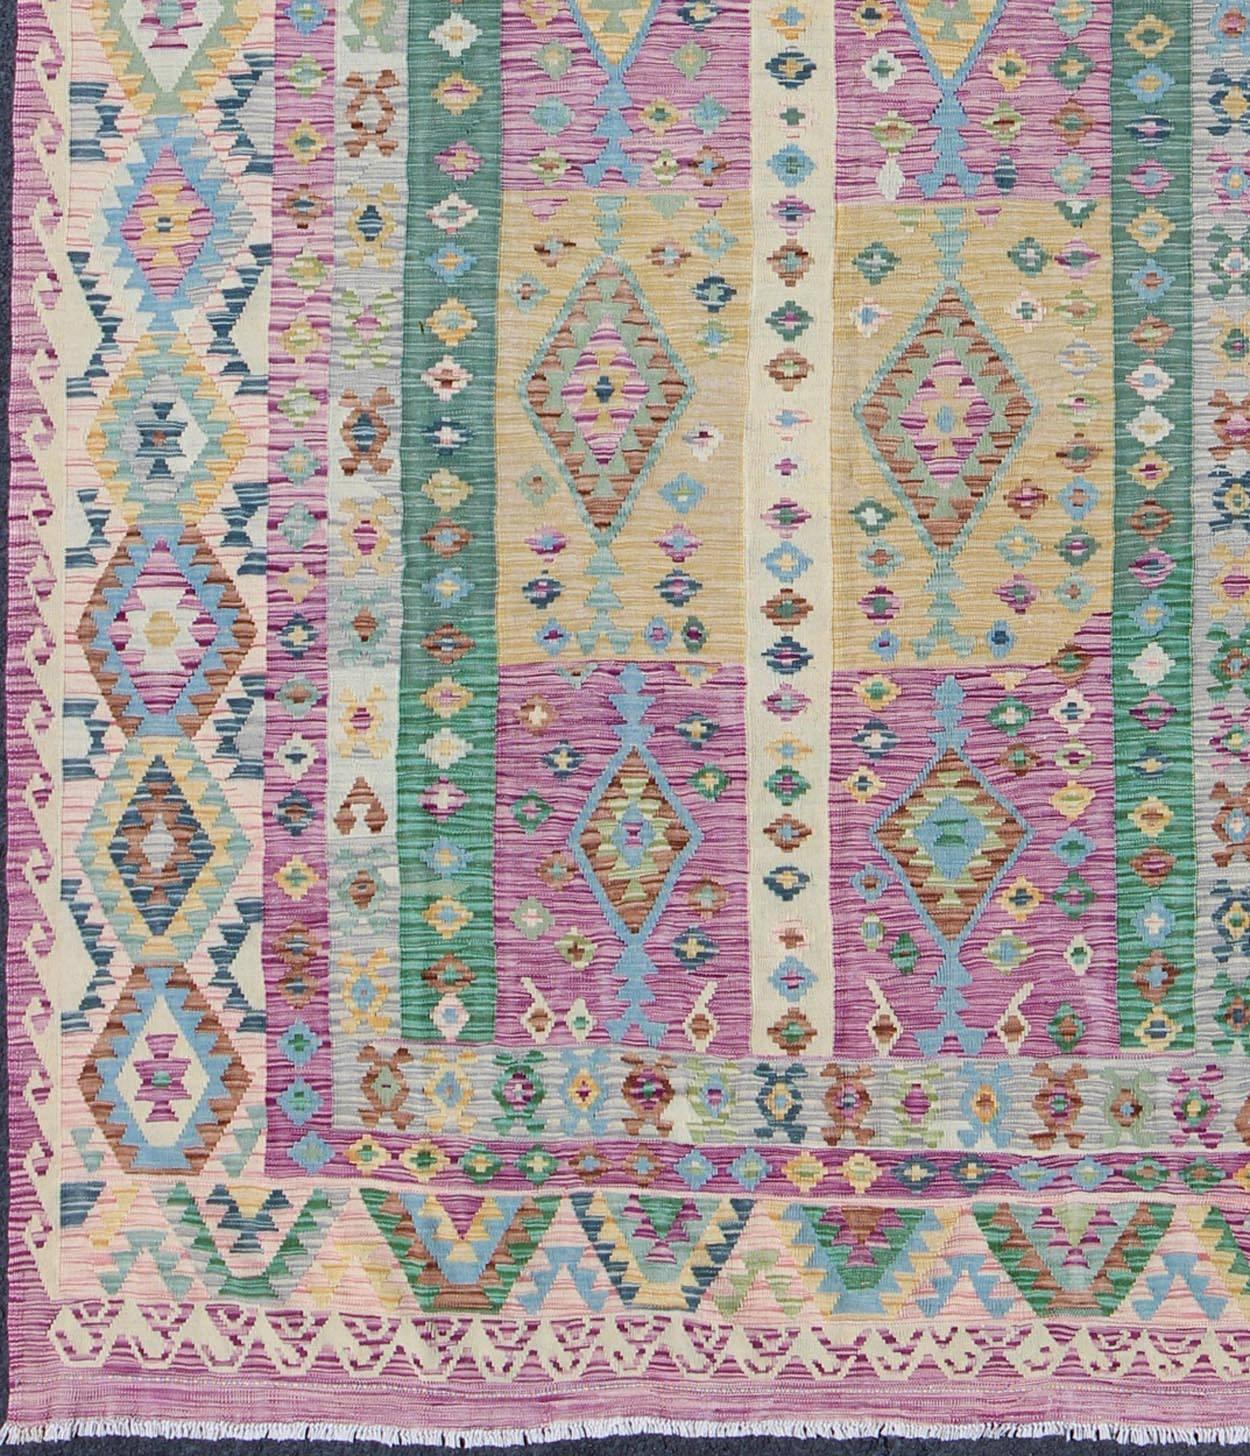 21st century Modern Afghan Flat Weave Kilim Rug in Purple, Lavender, Green, yellow and Cream rug orn-29453, country of origin / type: Afghanistan / Kilim.

This flat-weave Kilim bears a repeating diamond design with other geometric motifs. Set on a